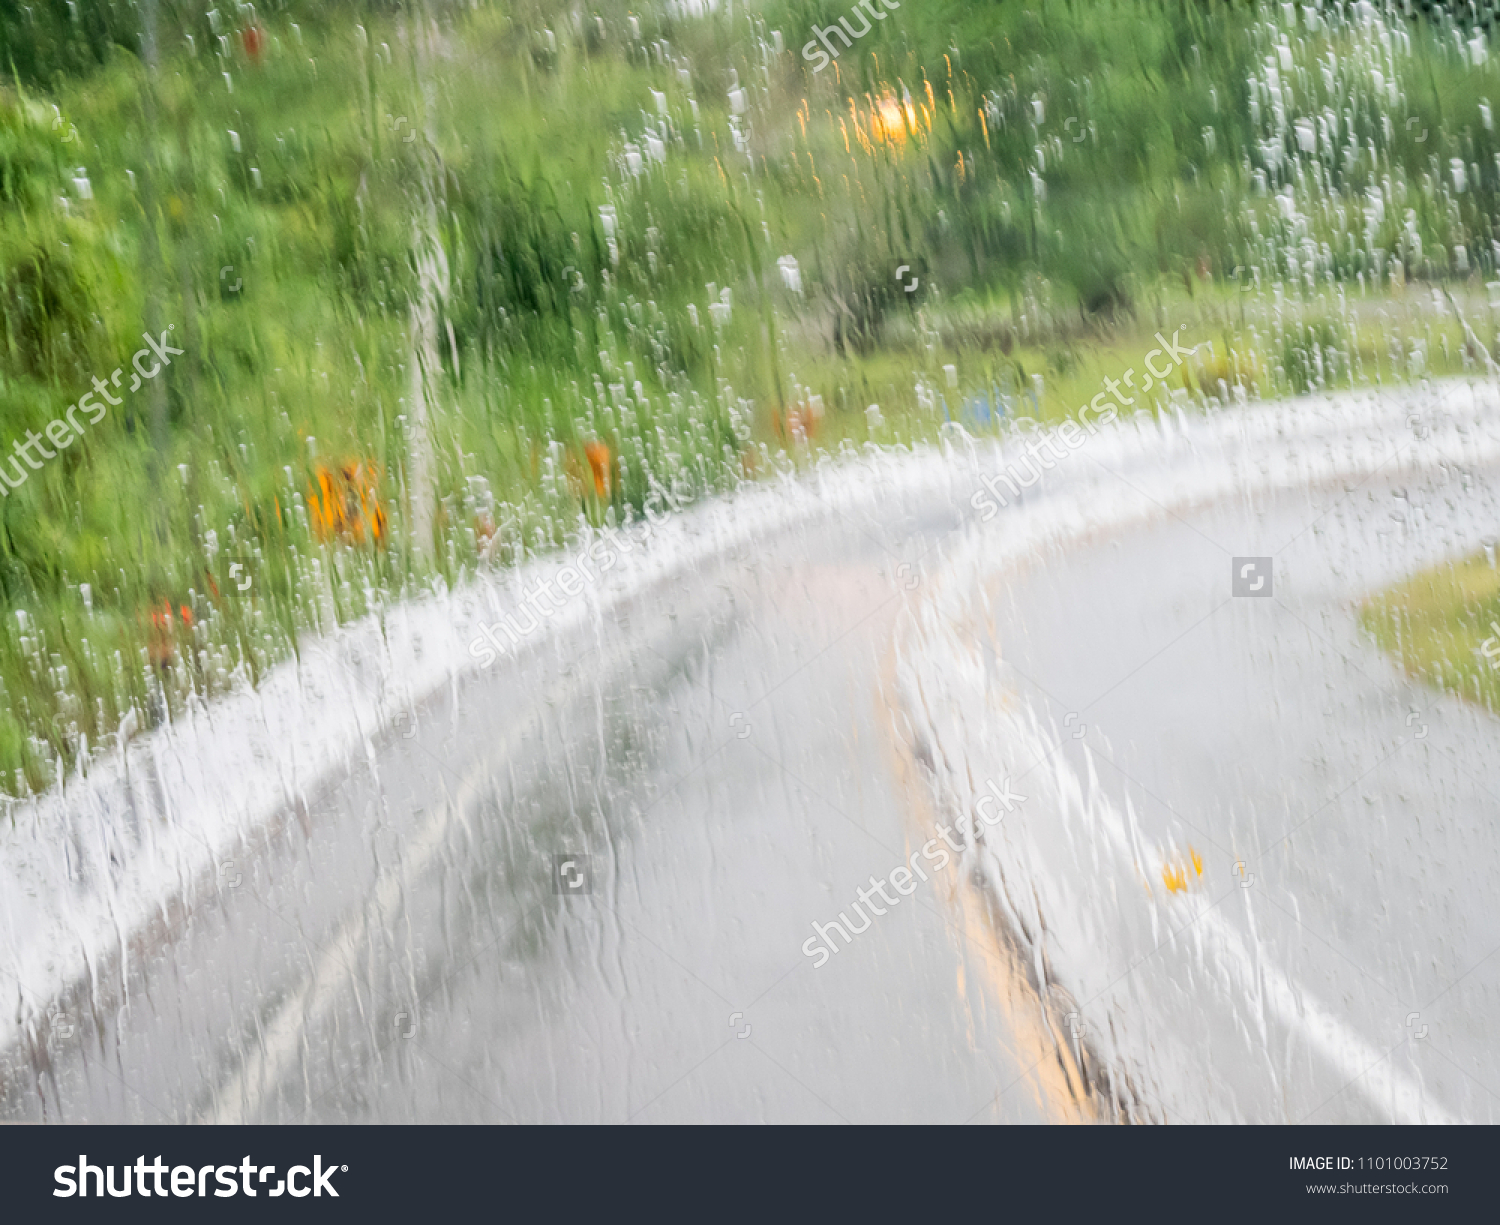 Blurred of wetting glass in front of a moving car on slipping curve road or street in rainy day can use for warning photo to be careful when driving the vehicle in raining season. #1101003752